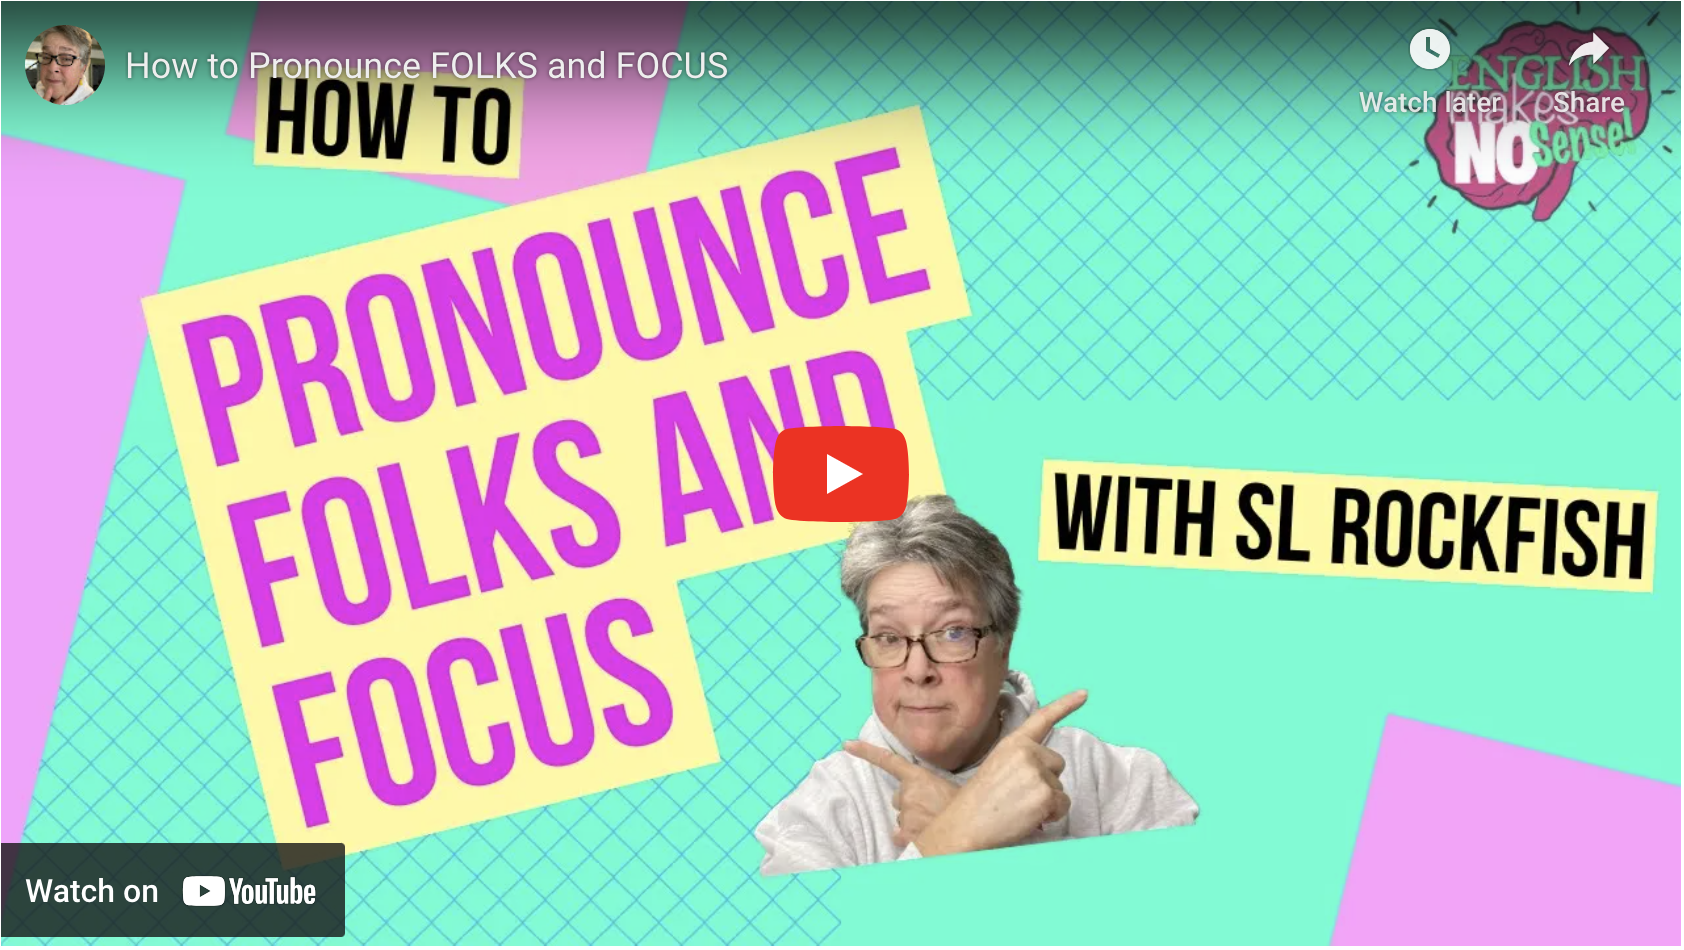 How to pronounce folks and focus with SL Rockfish